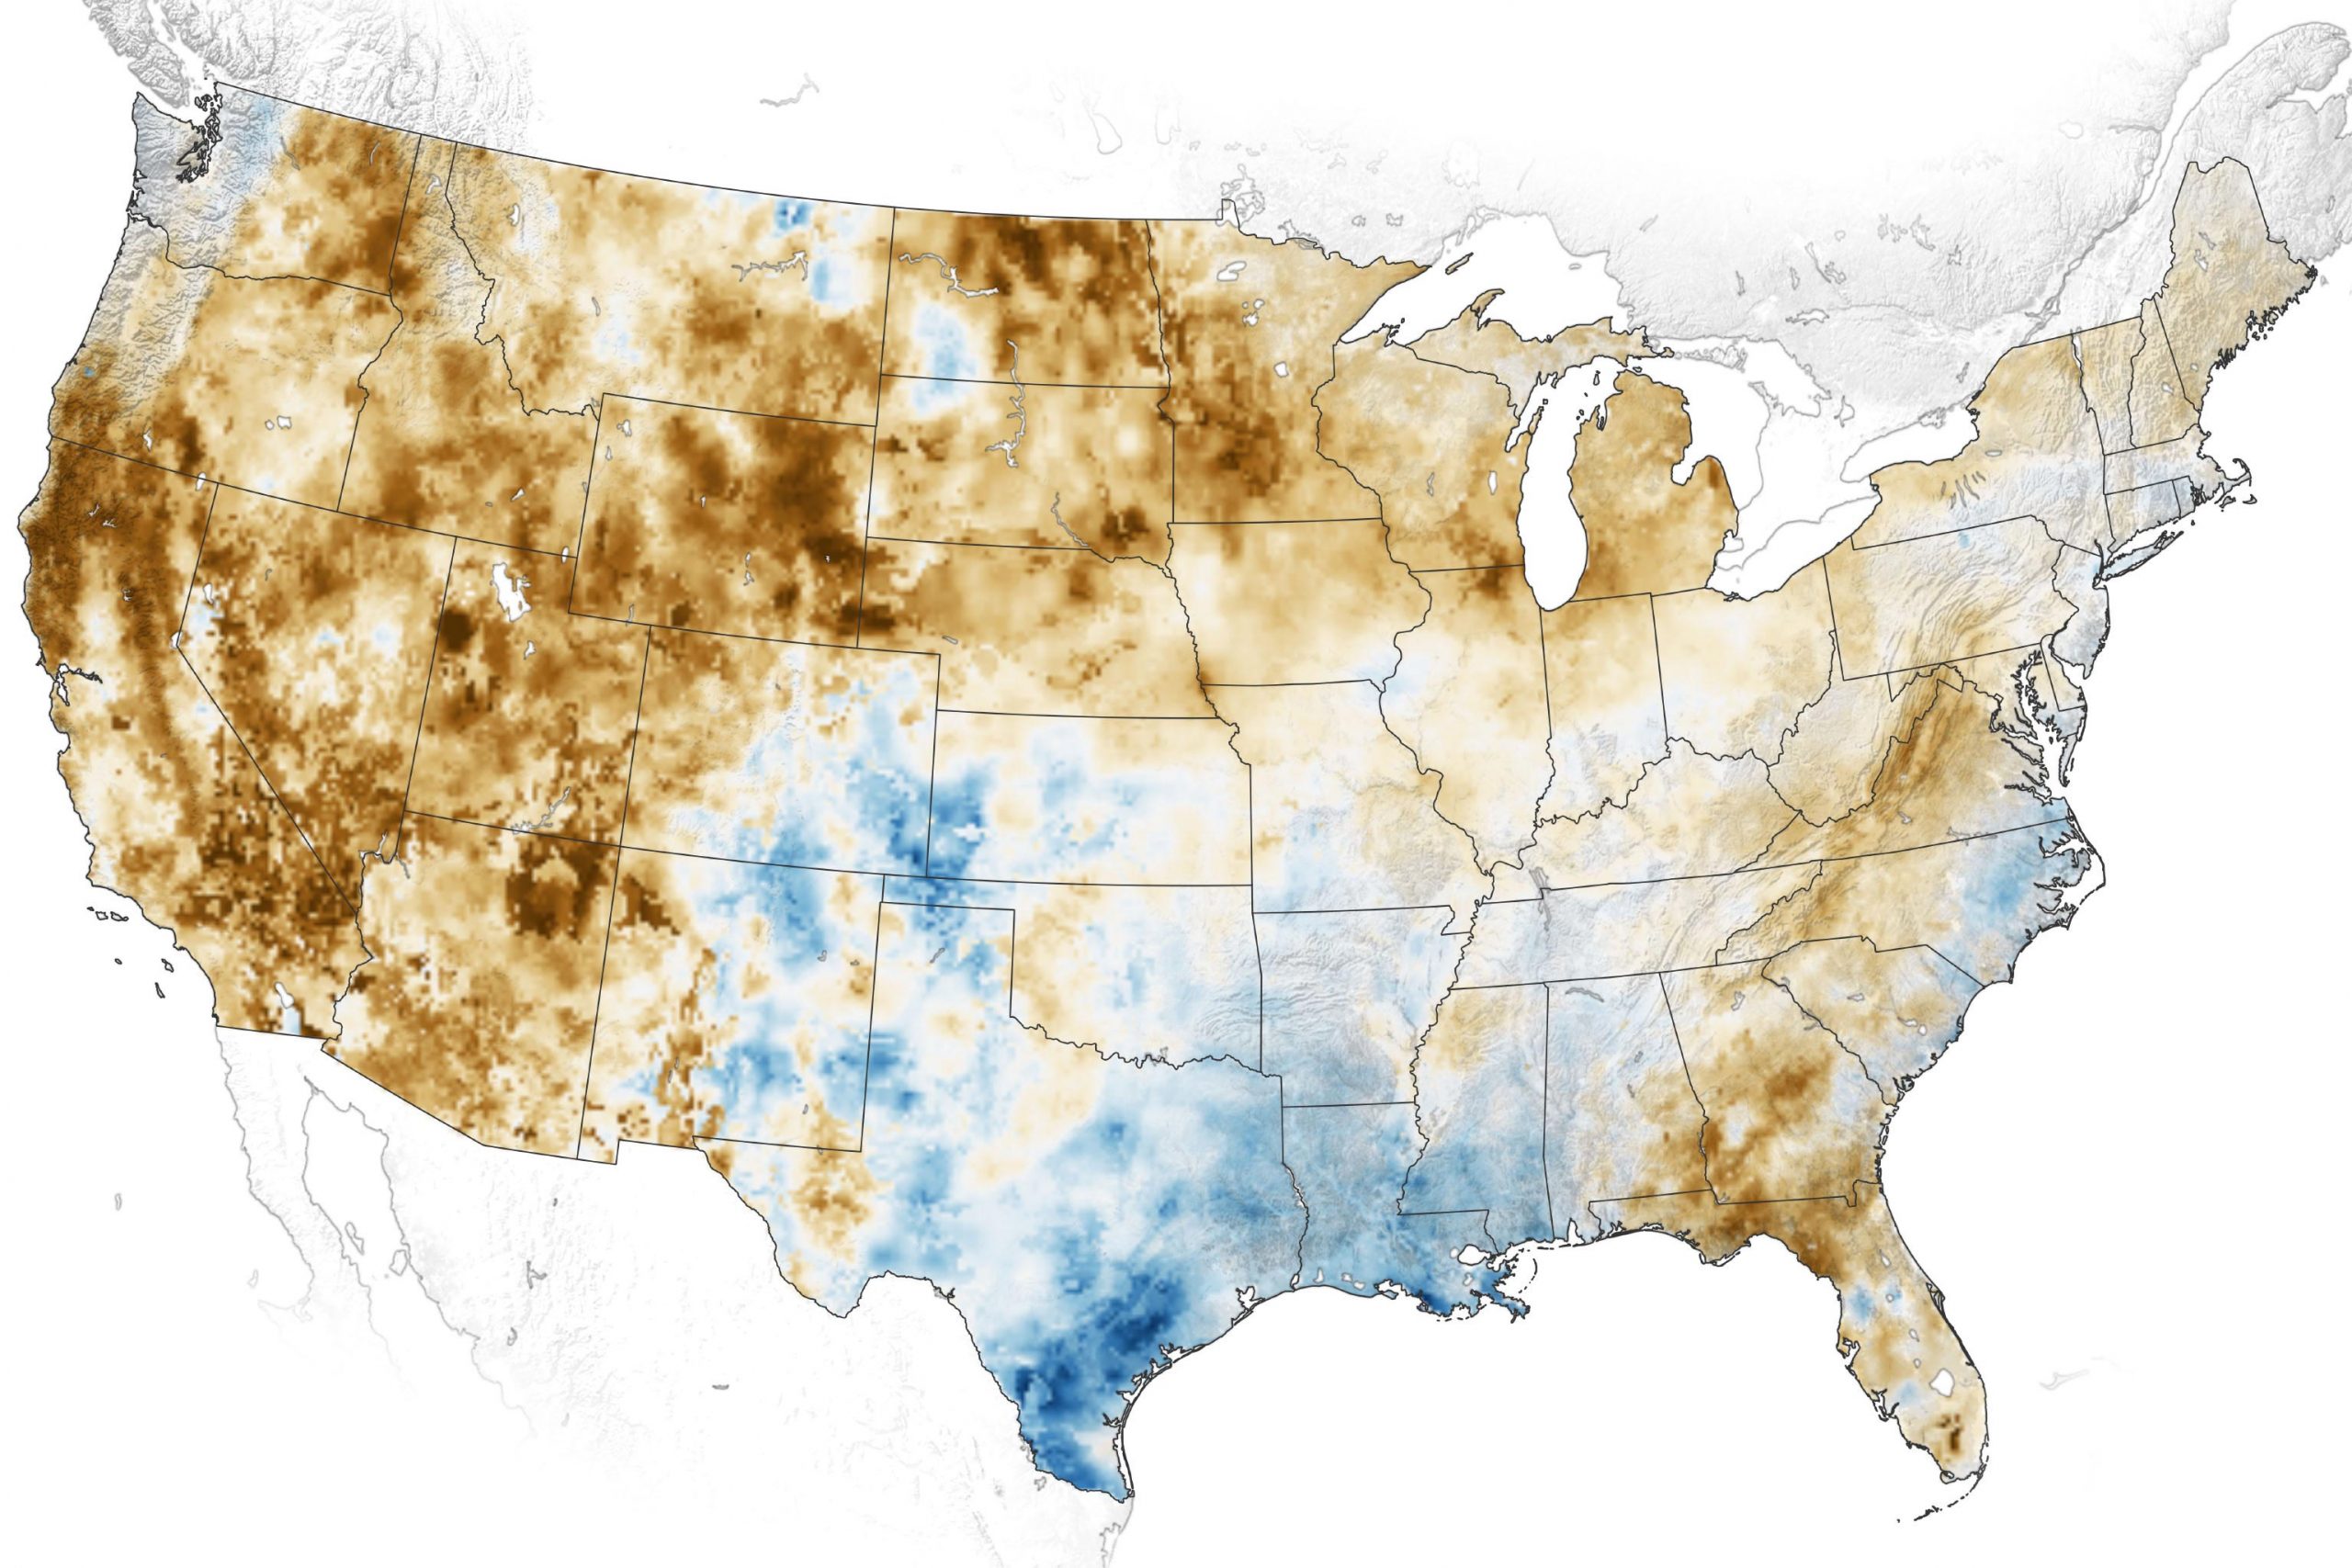 Long-Term Drought Grips the Western U.S. – Soils and Plants Are Parched - SciTechDaily